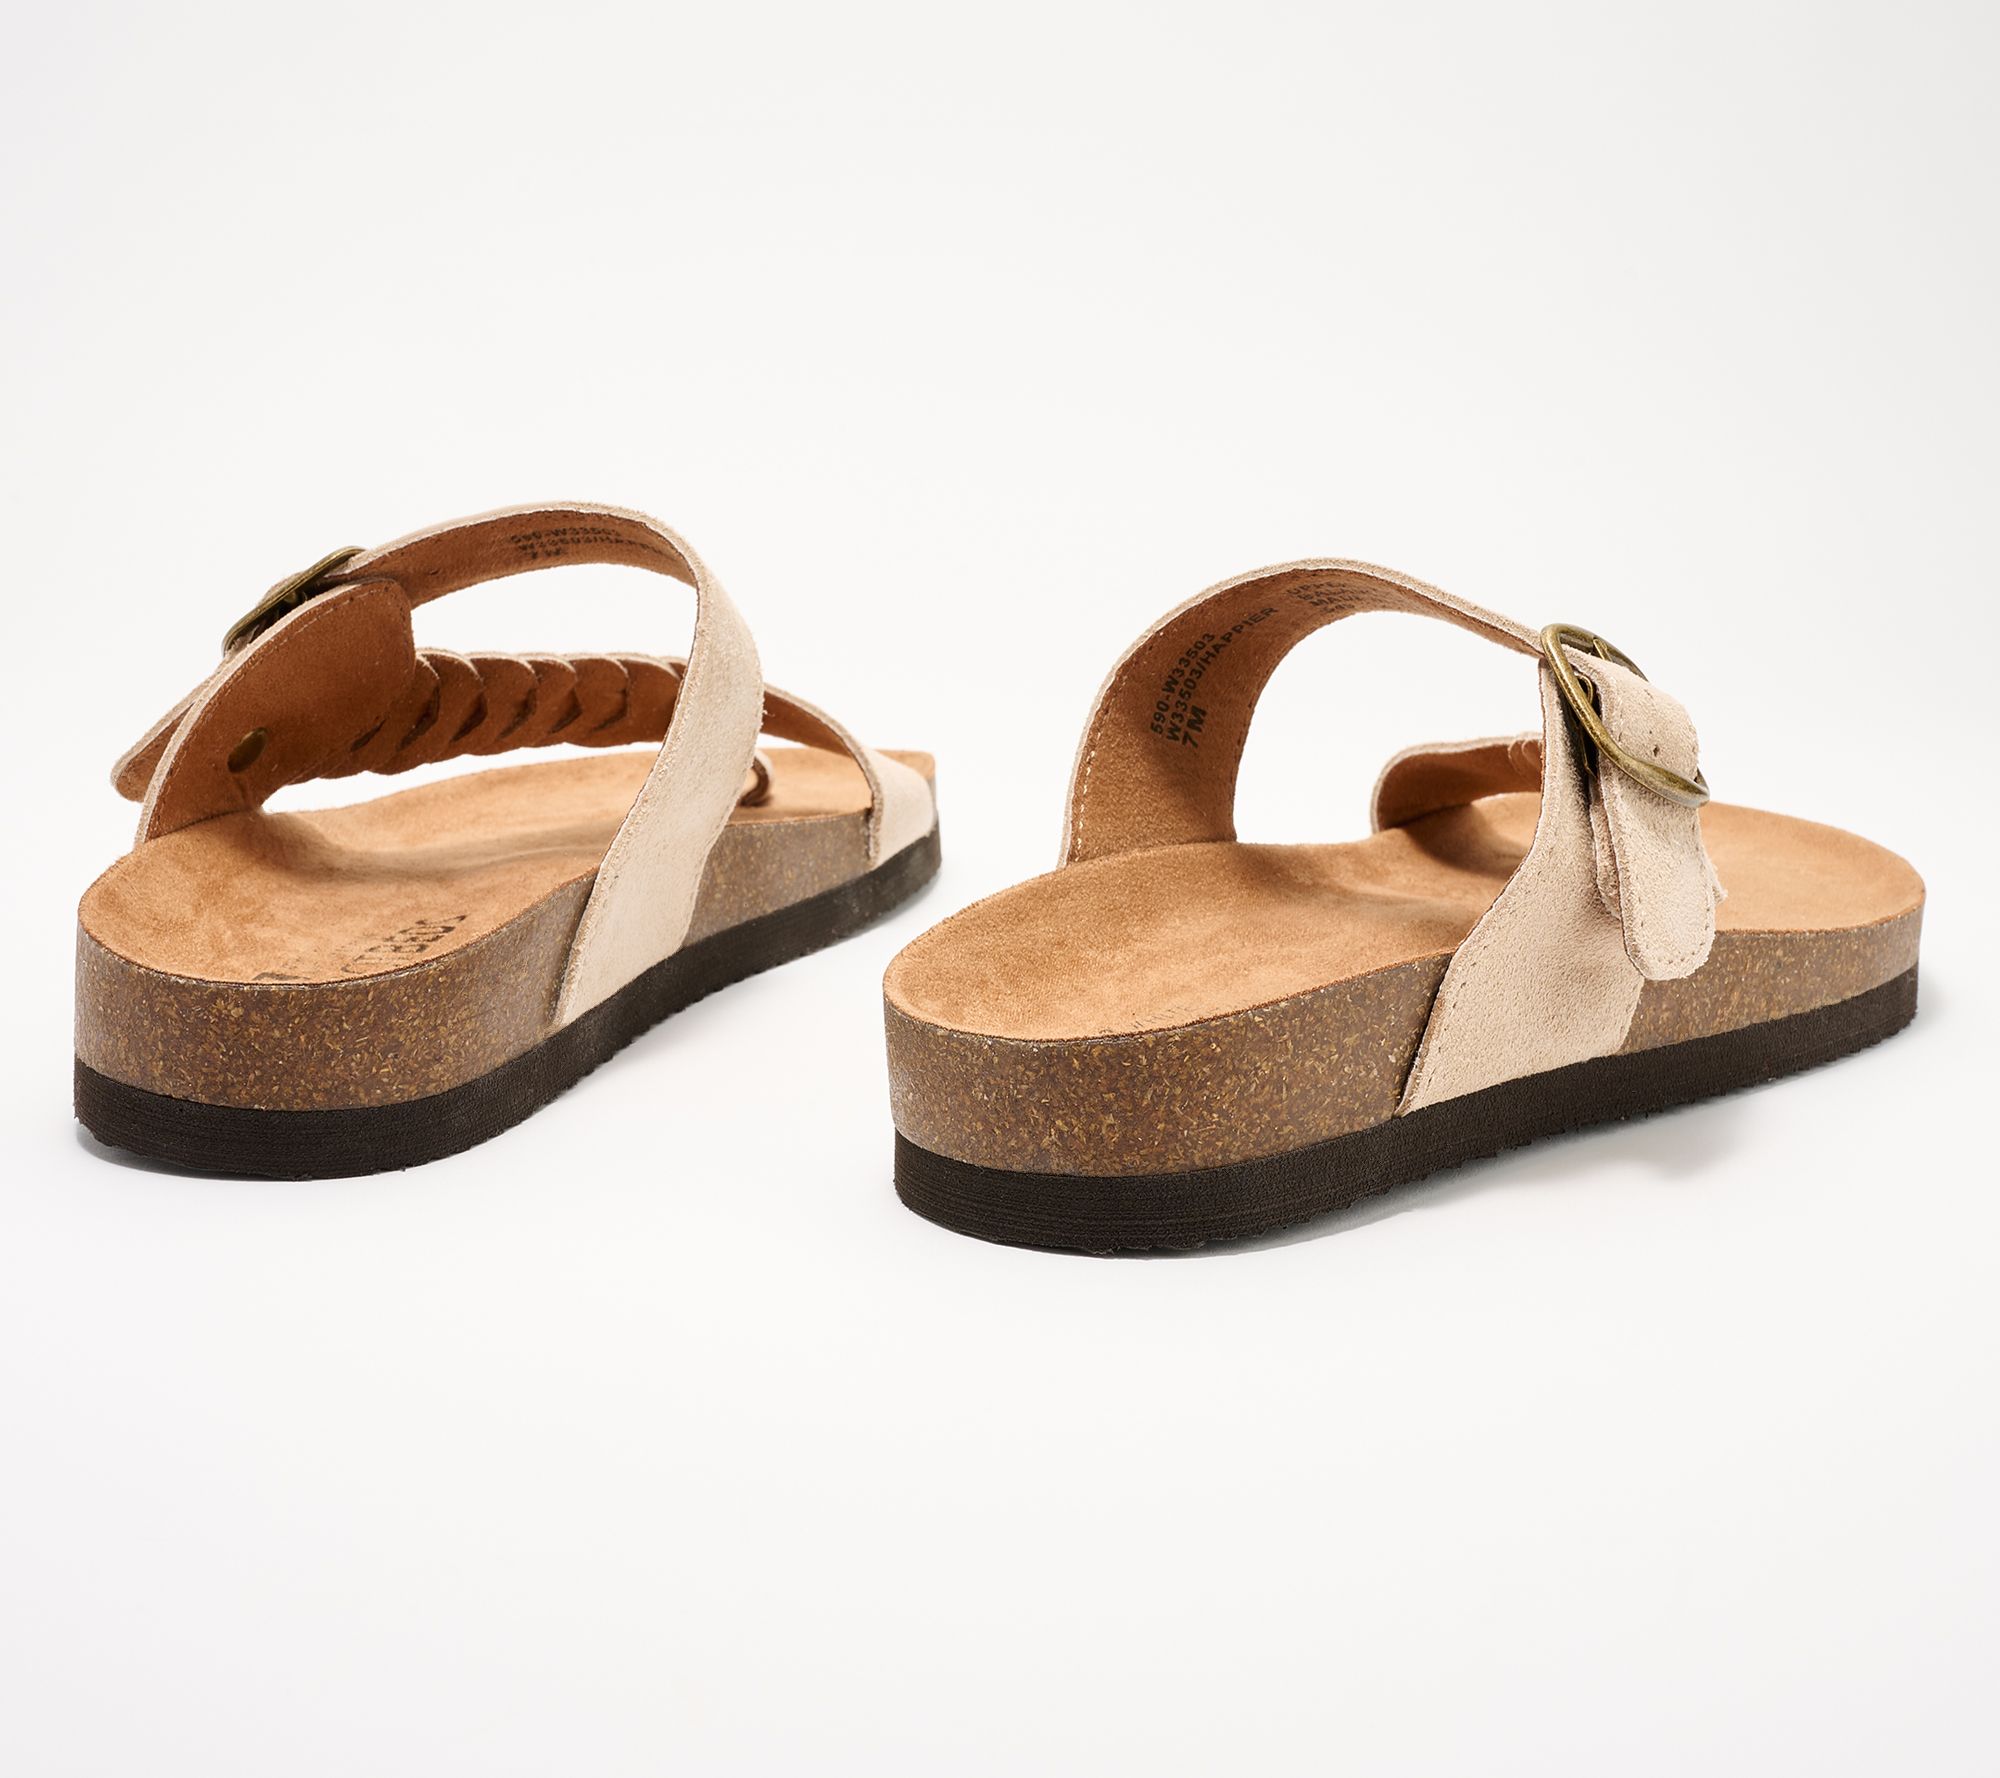 White Mountain Braided Leather Toe-Post Sandals - Happier - QVC.com